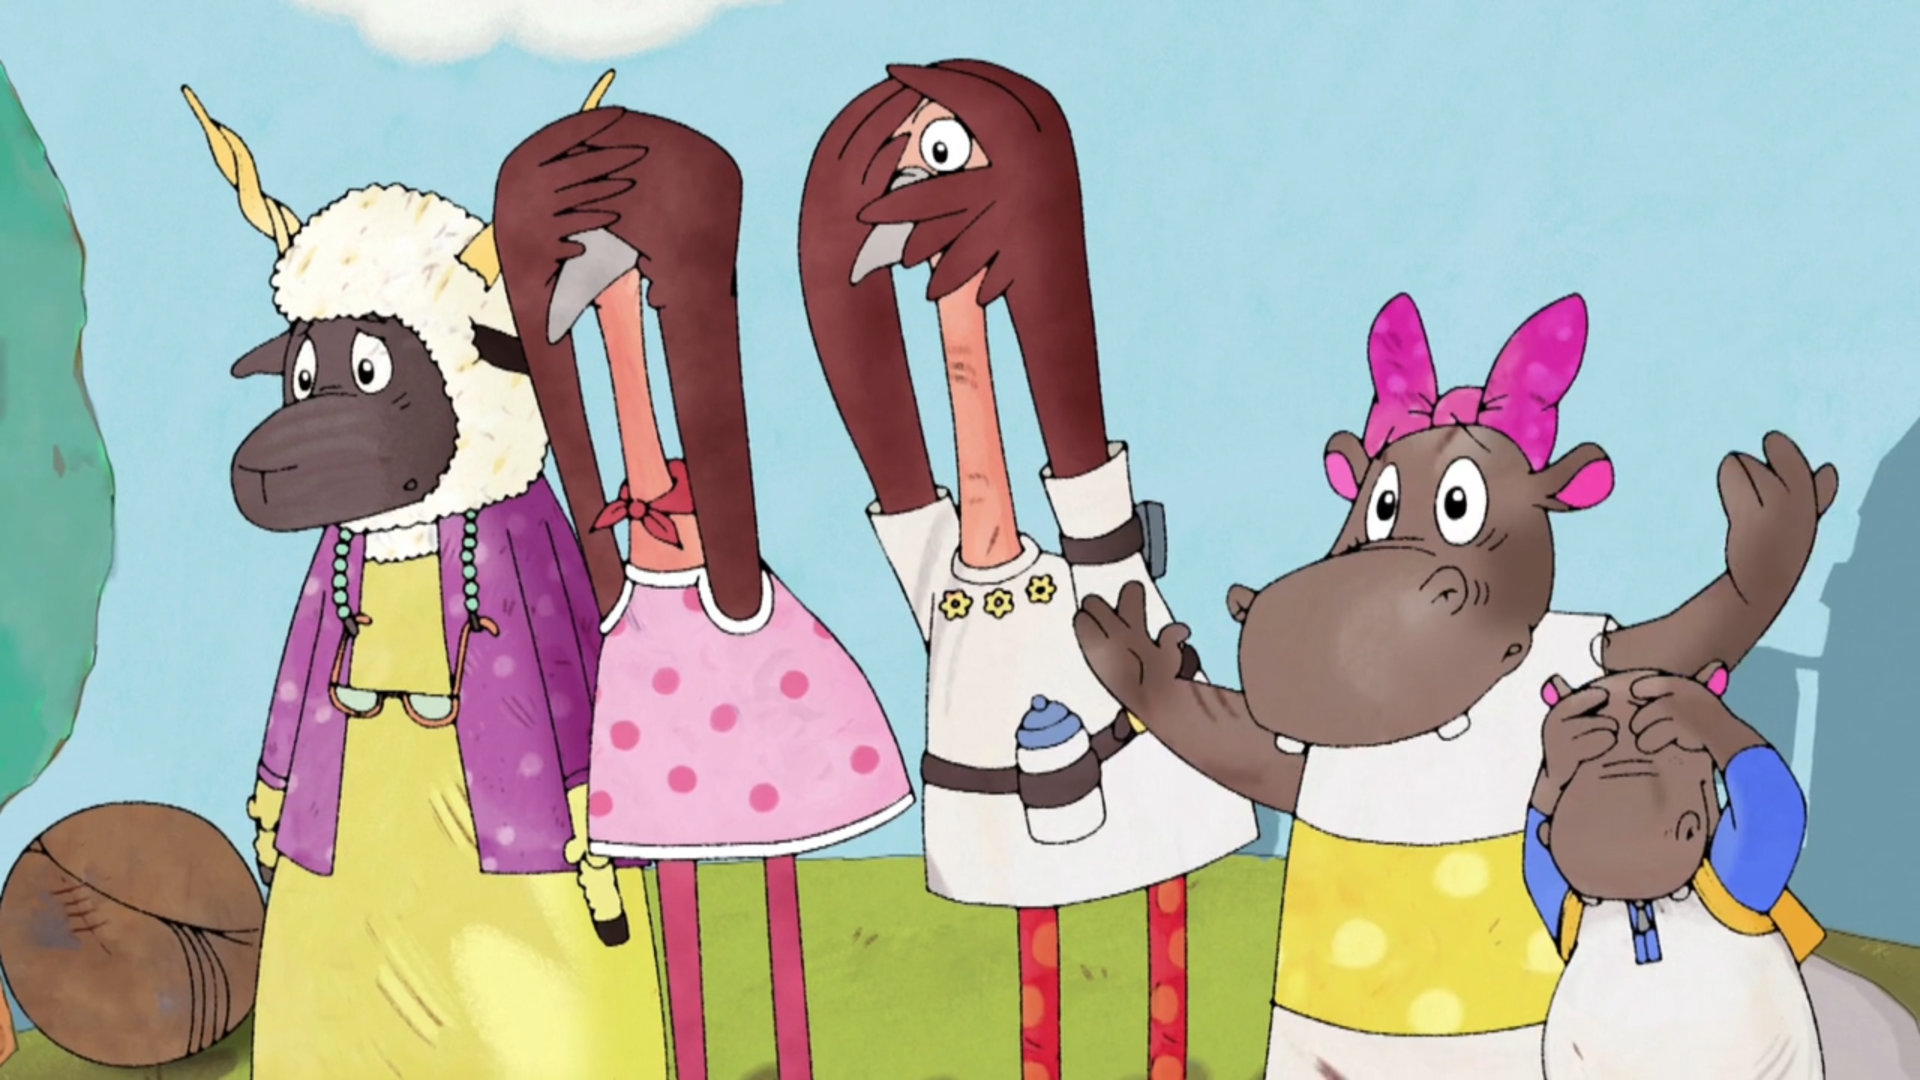 Cartoon animals in clothes, covering their eyes in worry.